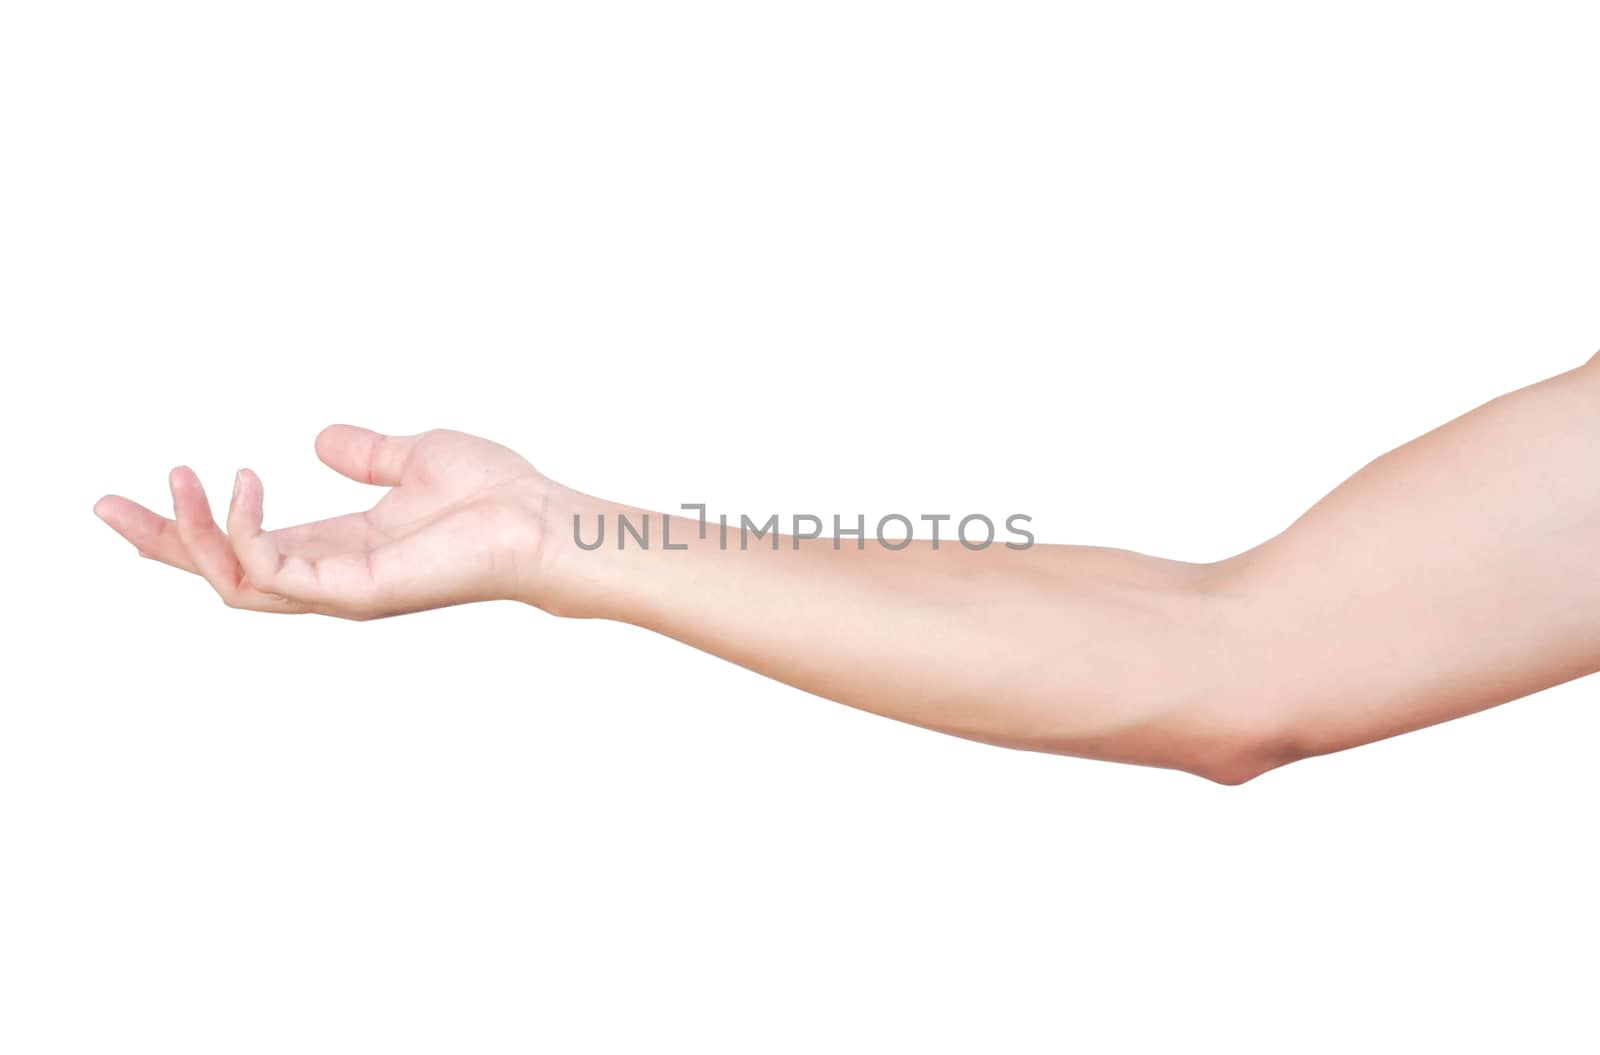 Man hands holding something on white background for product adve by pt.pongsak@gmail.com